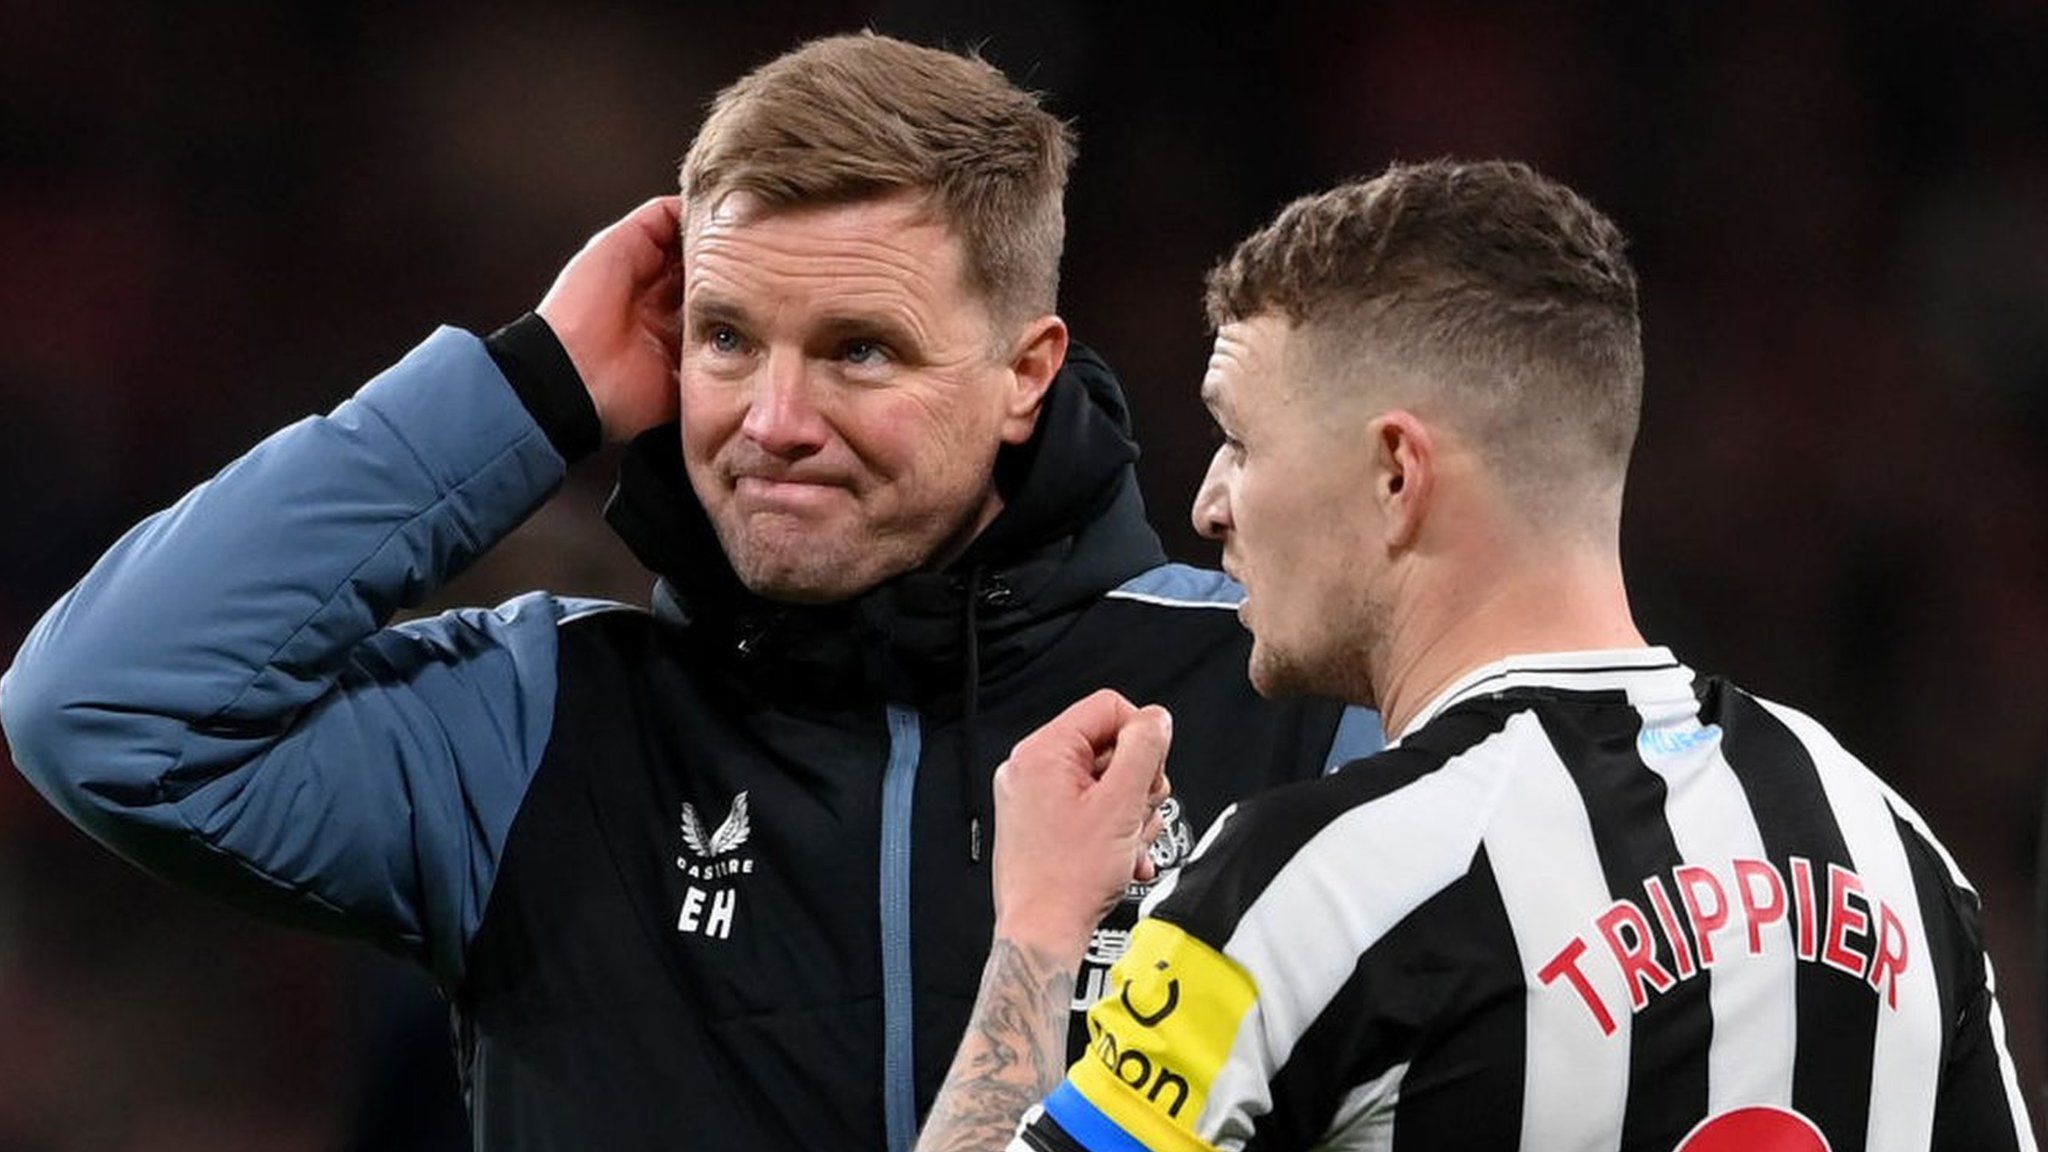 Newcastle boss Eddie Howe and captain Kieran Trippier were left to reflect on what might have been as Manchester United celebrated their Carabao Cup final triumph.